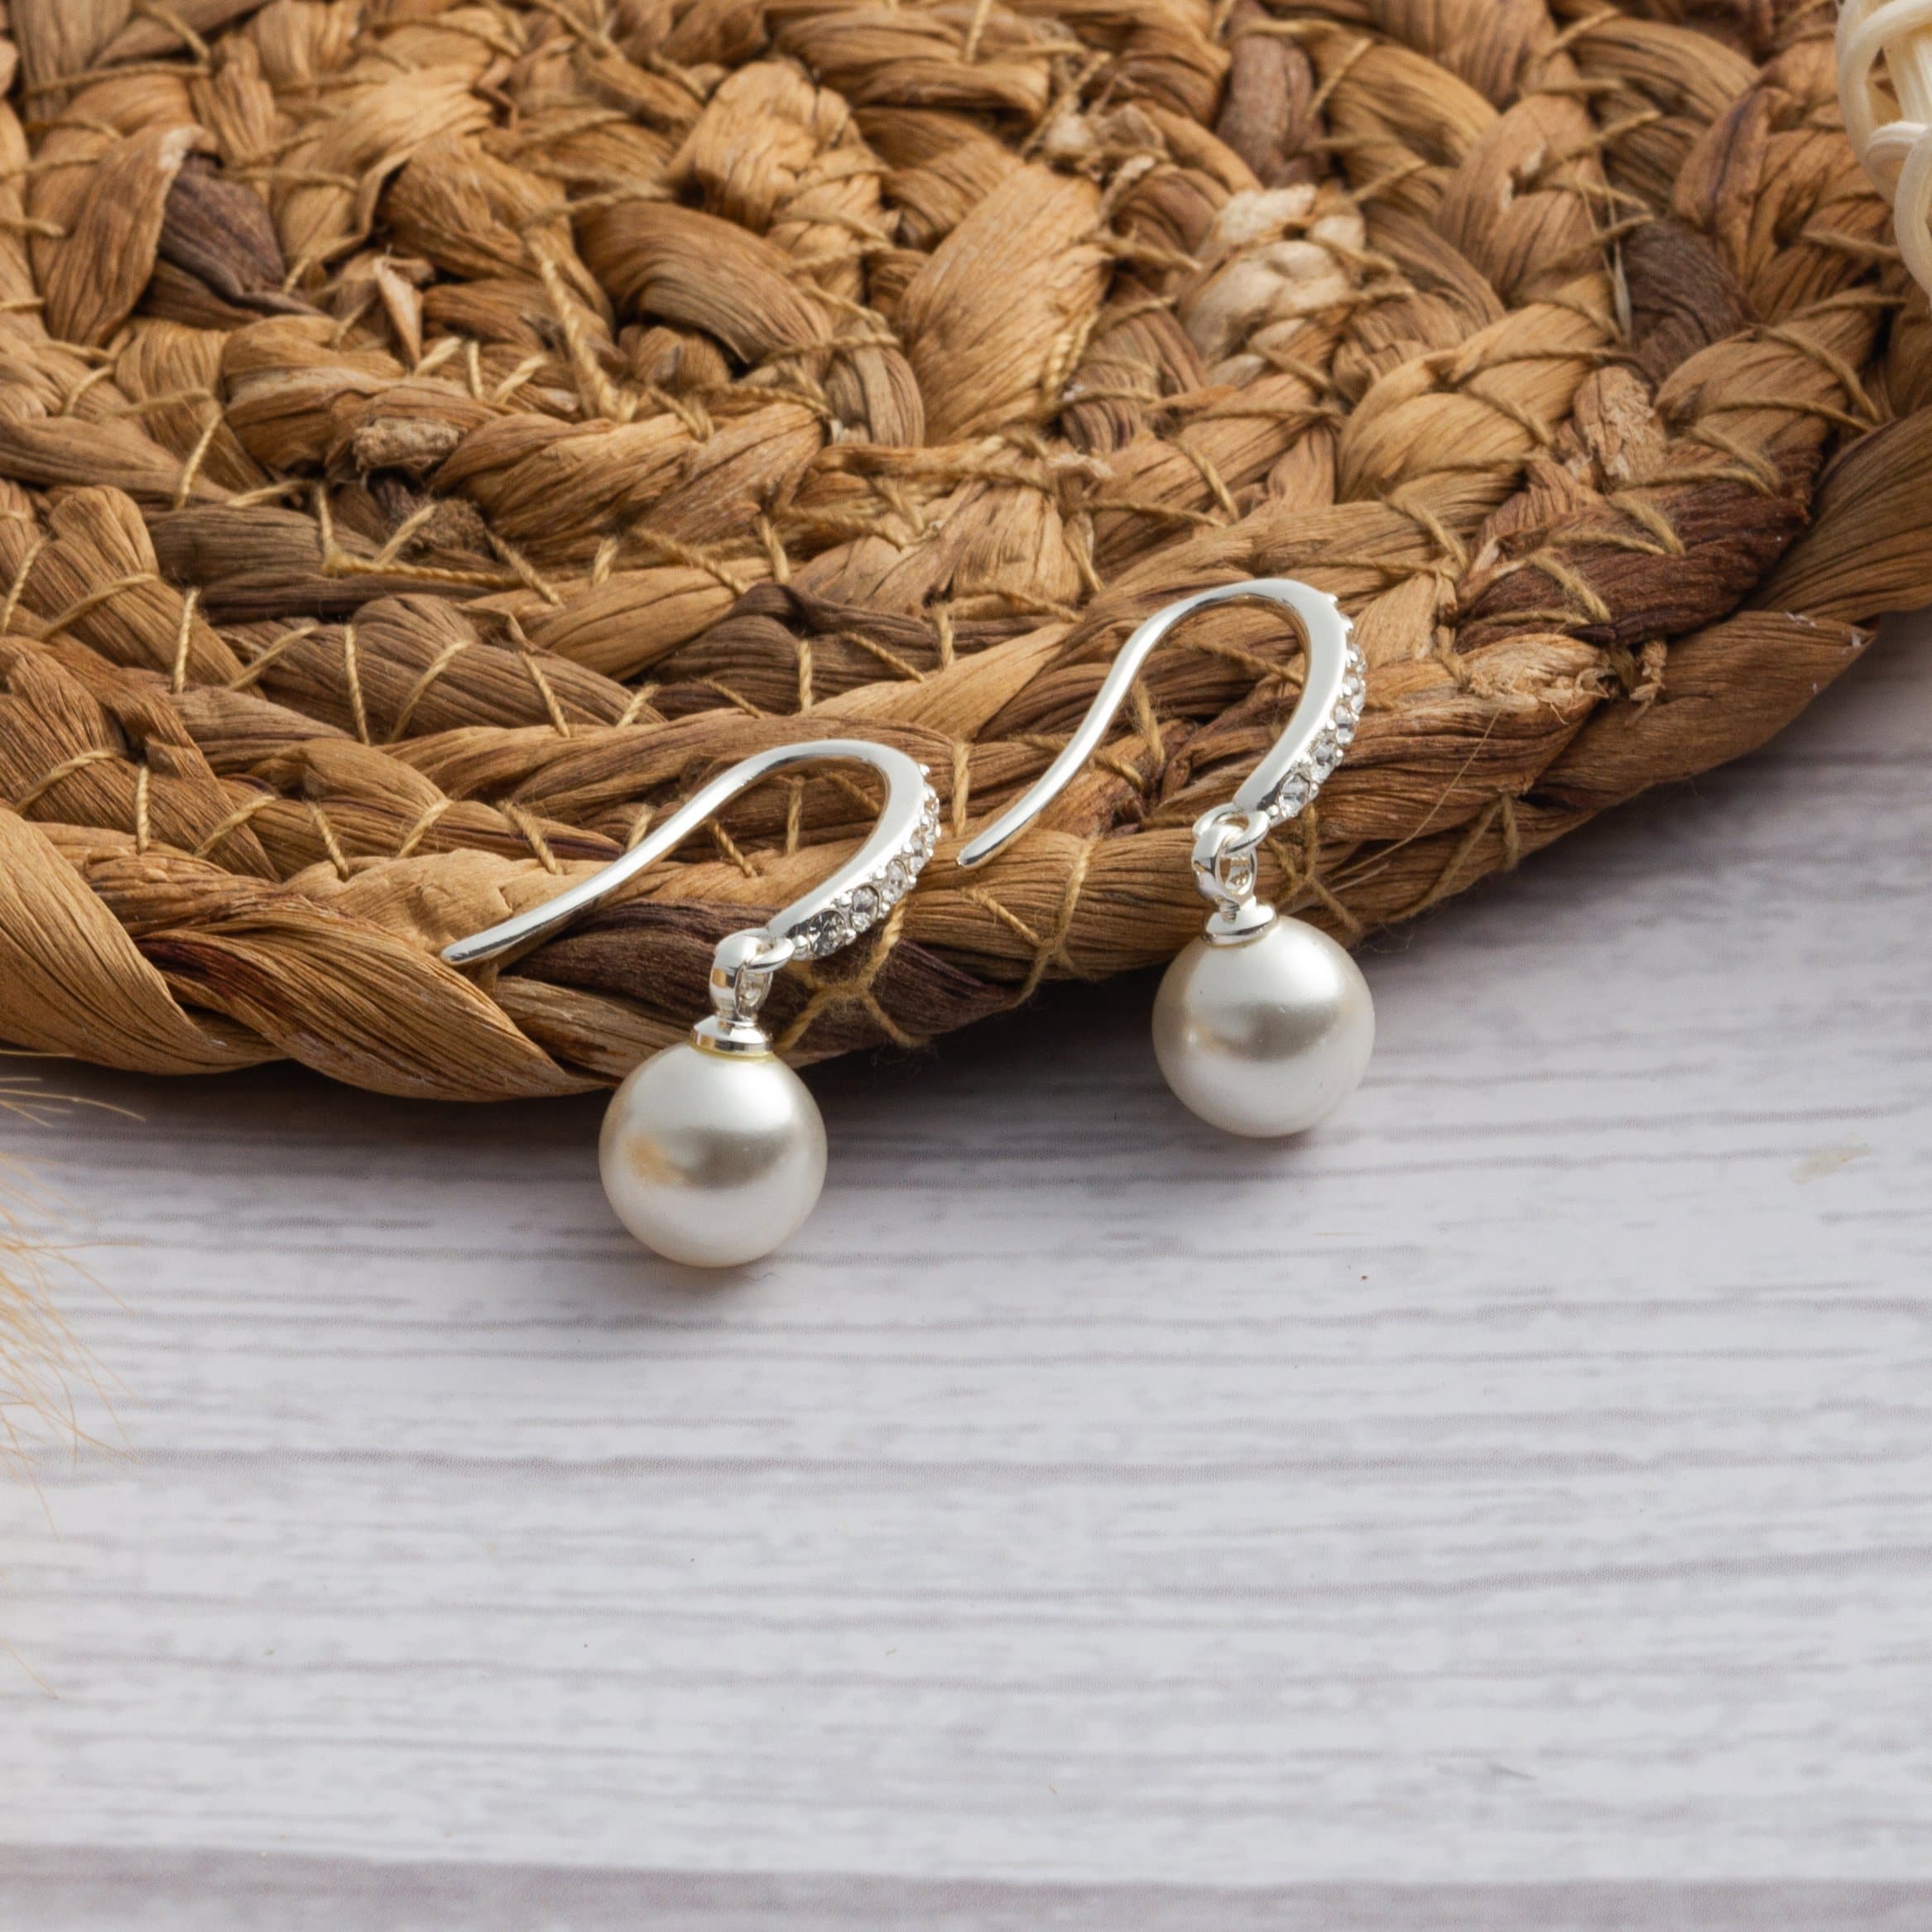 Silver Plated Pearl Drop Earrings Created with Zircondia® Crystals